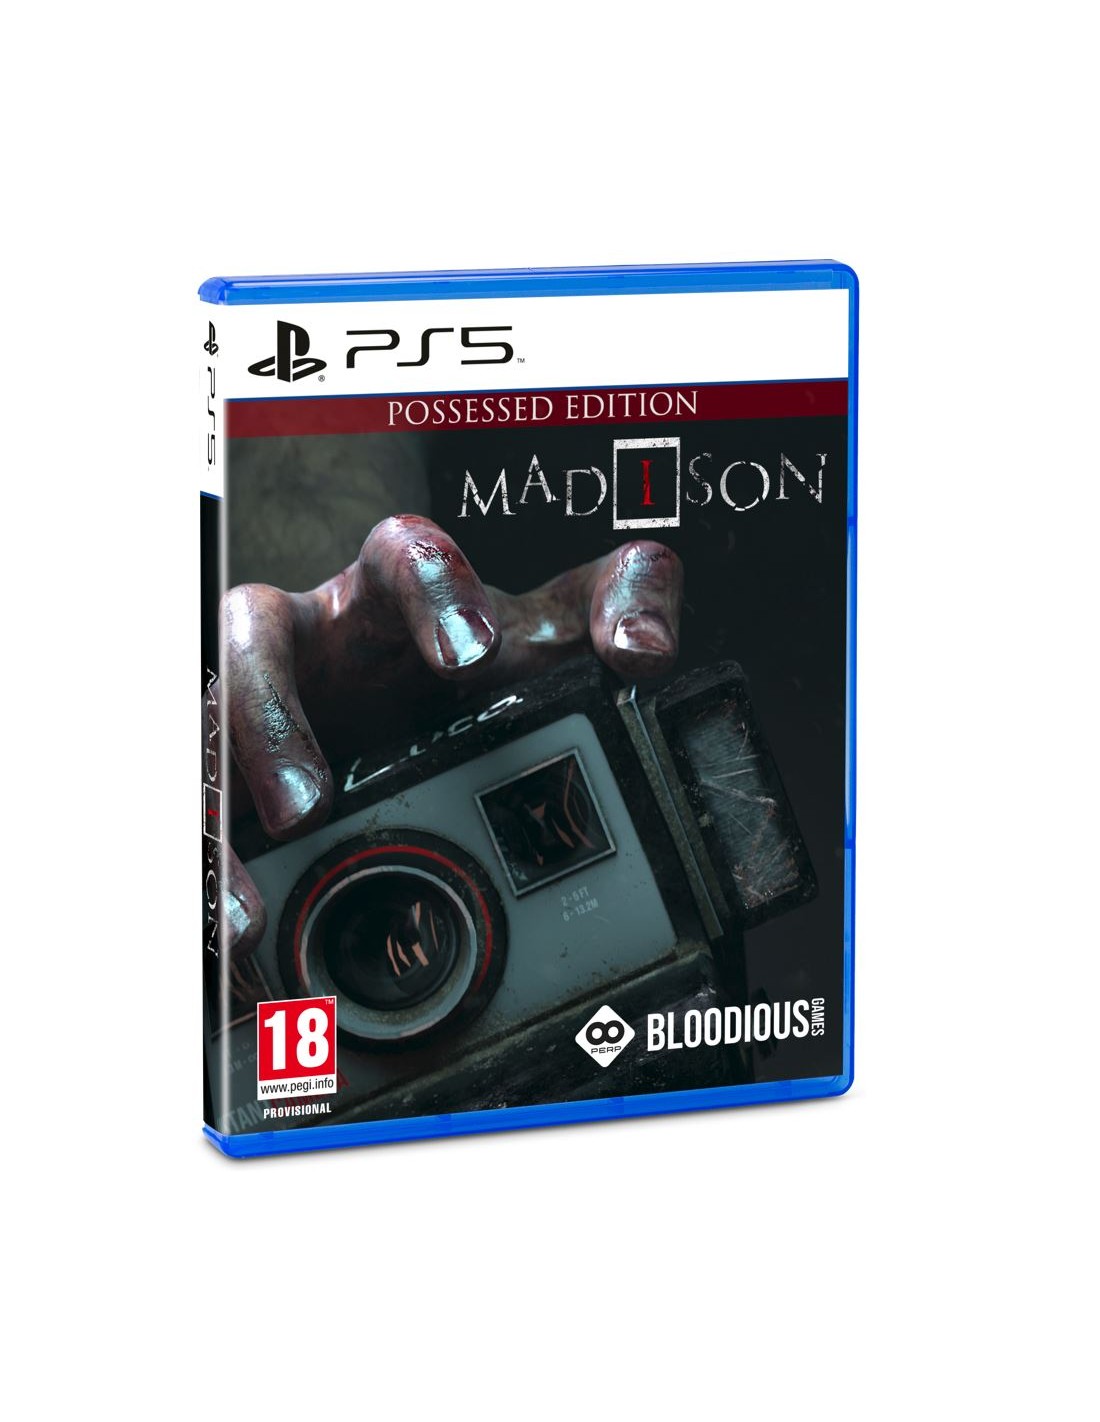 Madison The Possessed Edition - PS5 - Brand New, Factory Sealed